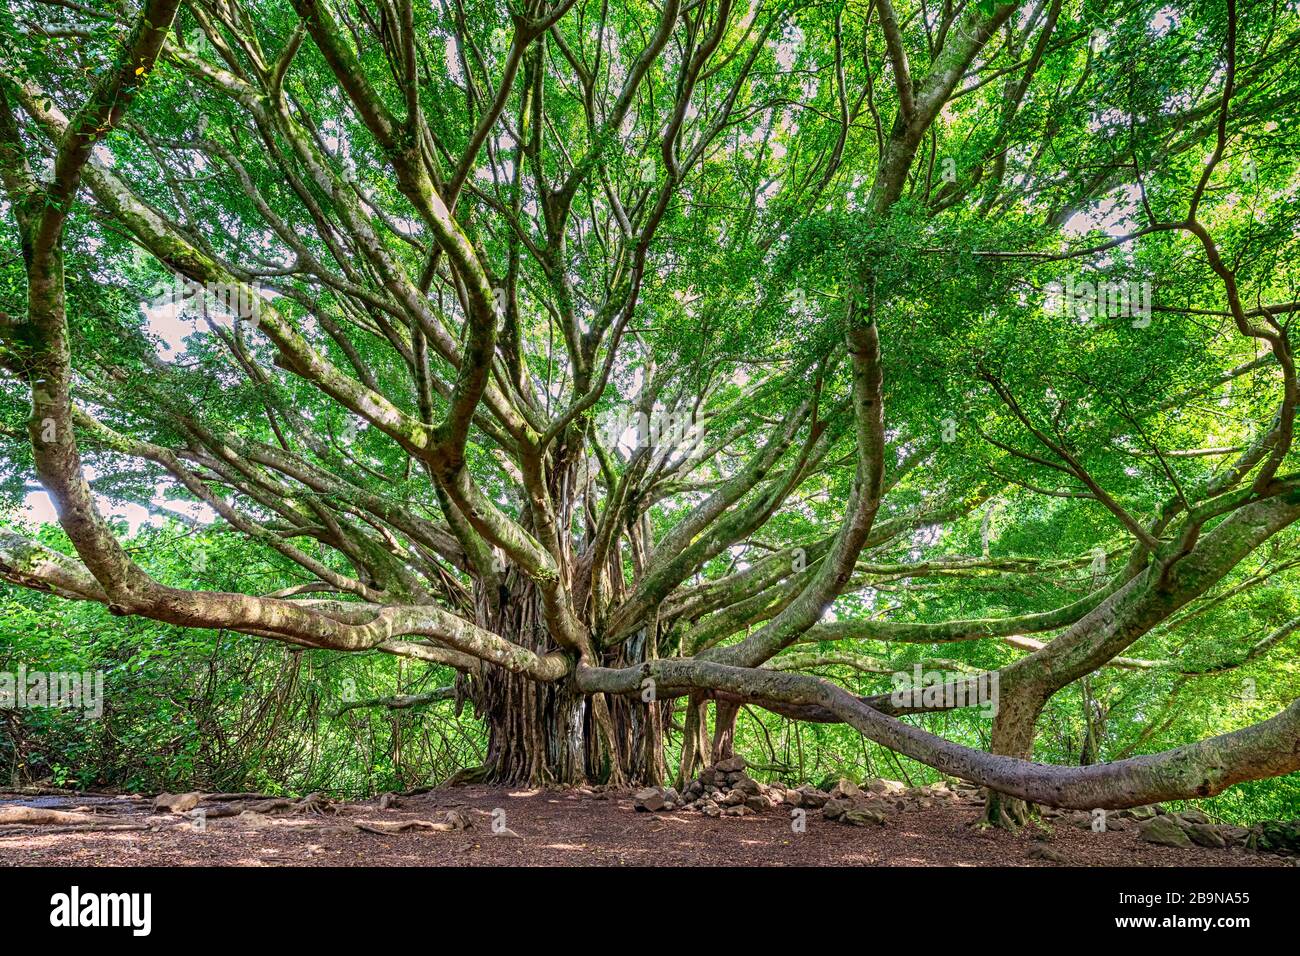 Large Banyan tree with reaching branches in Maui, HI along the Pipiwai trail near the road to Hana Stock Photo